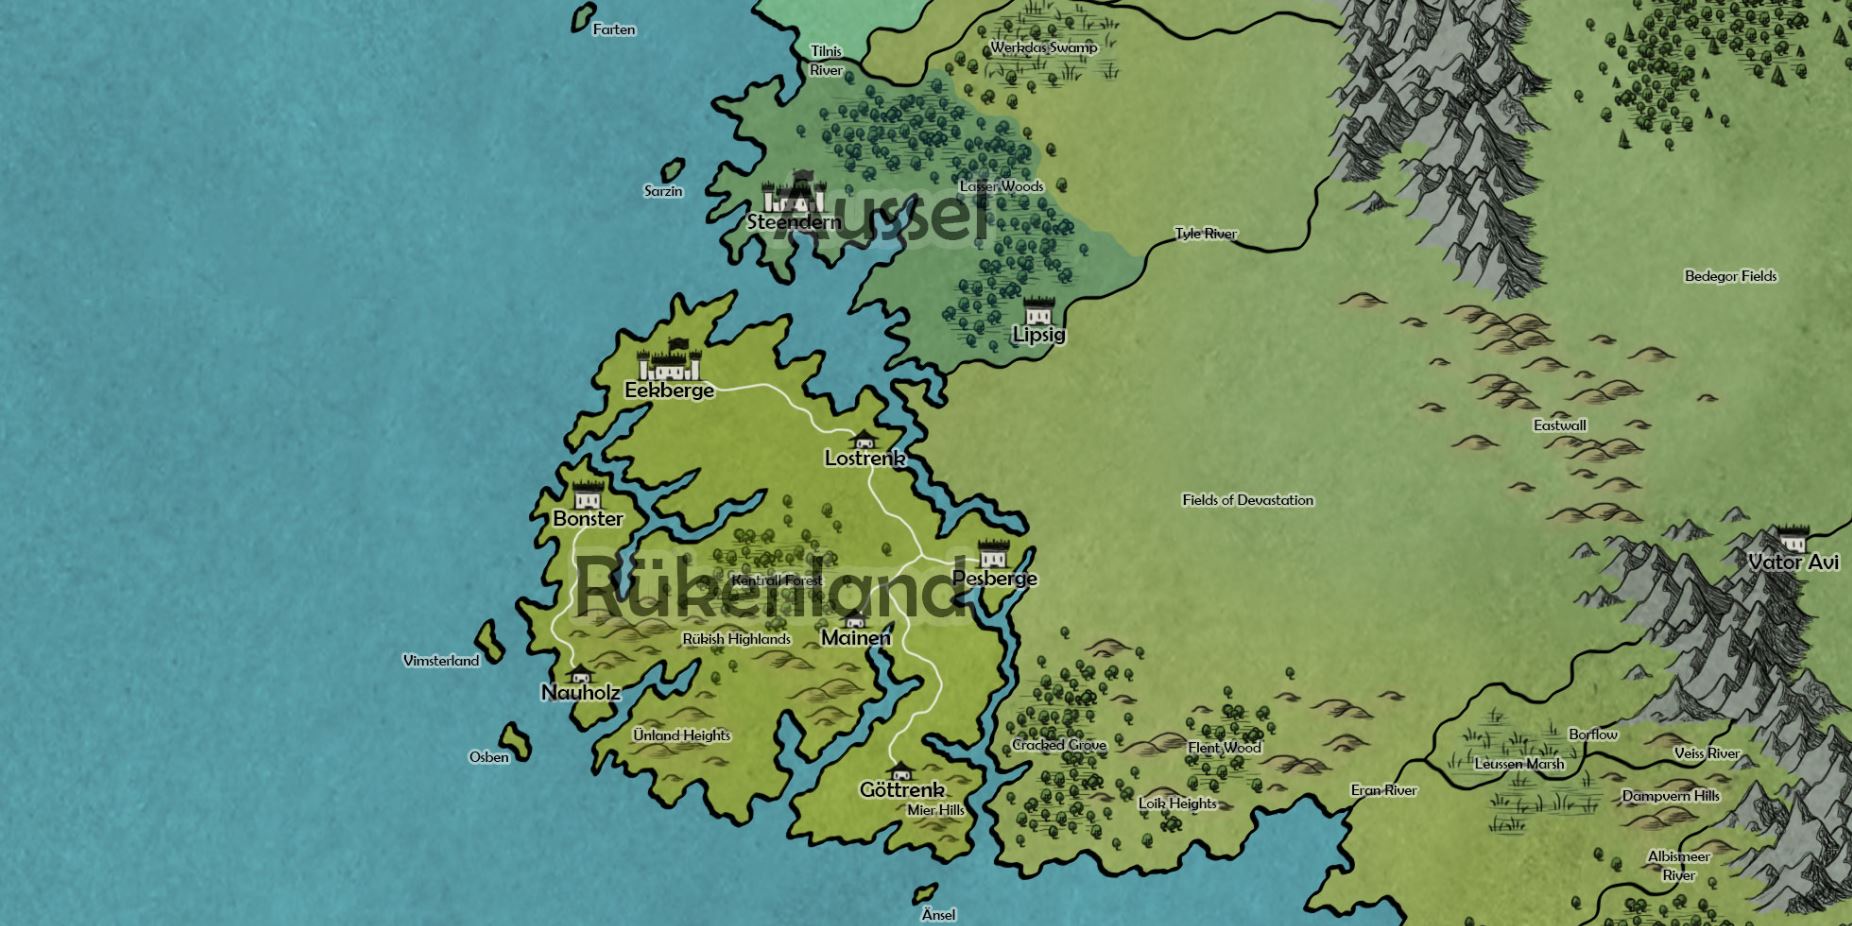 Rükenland and Aussel cover